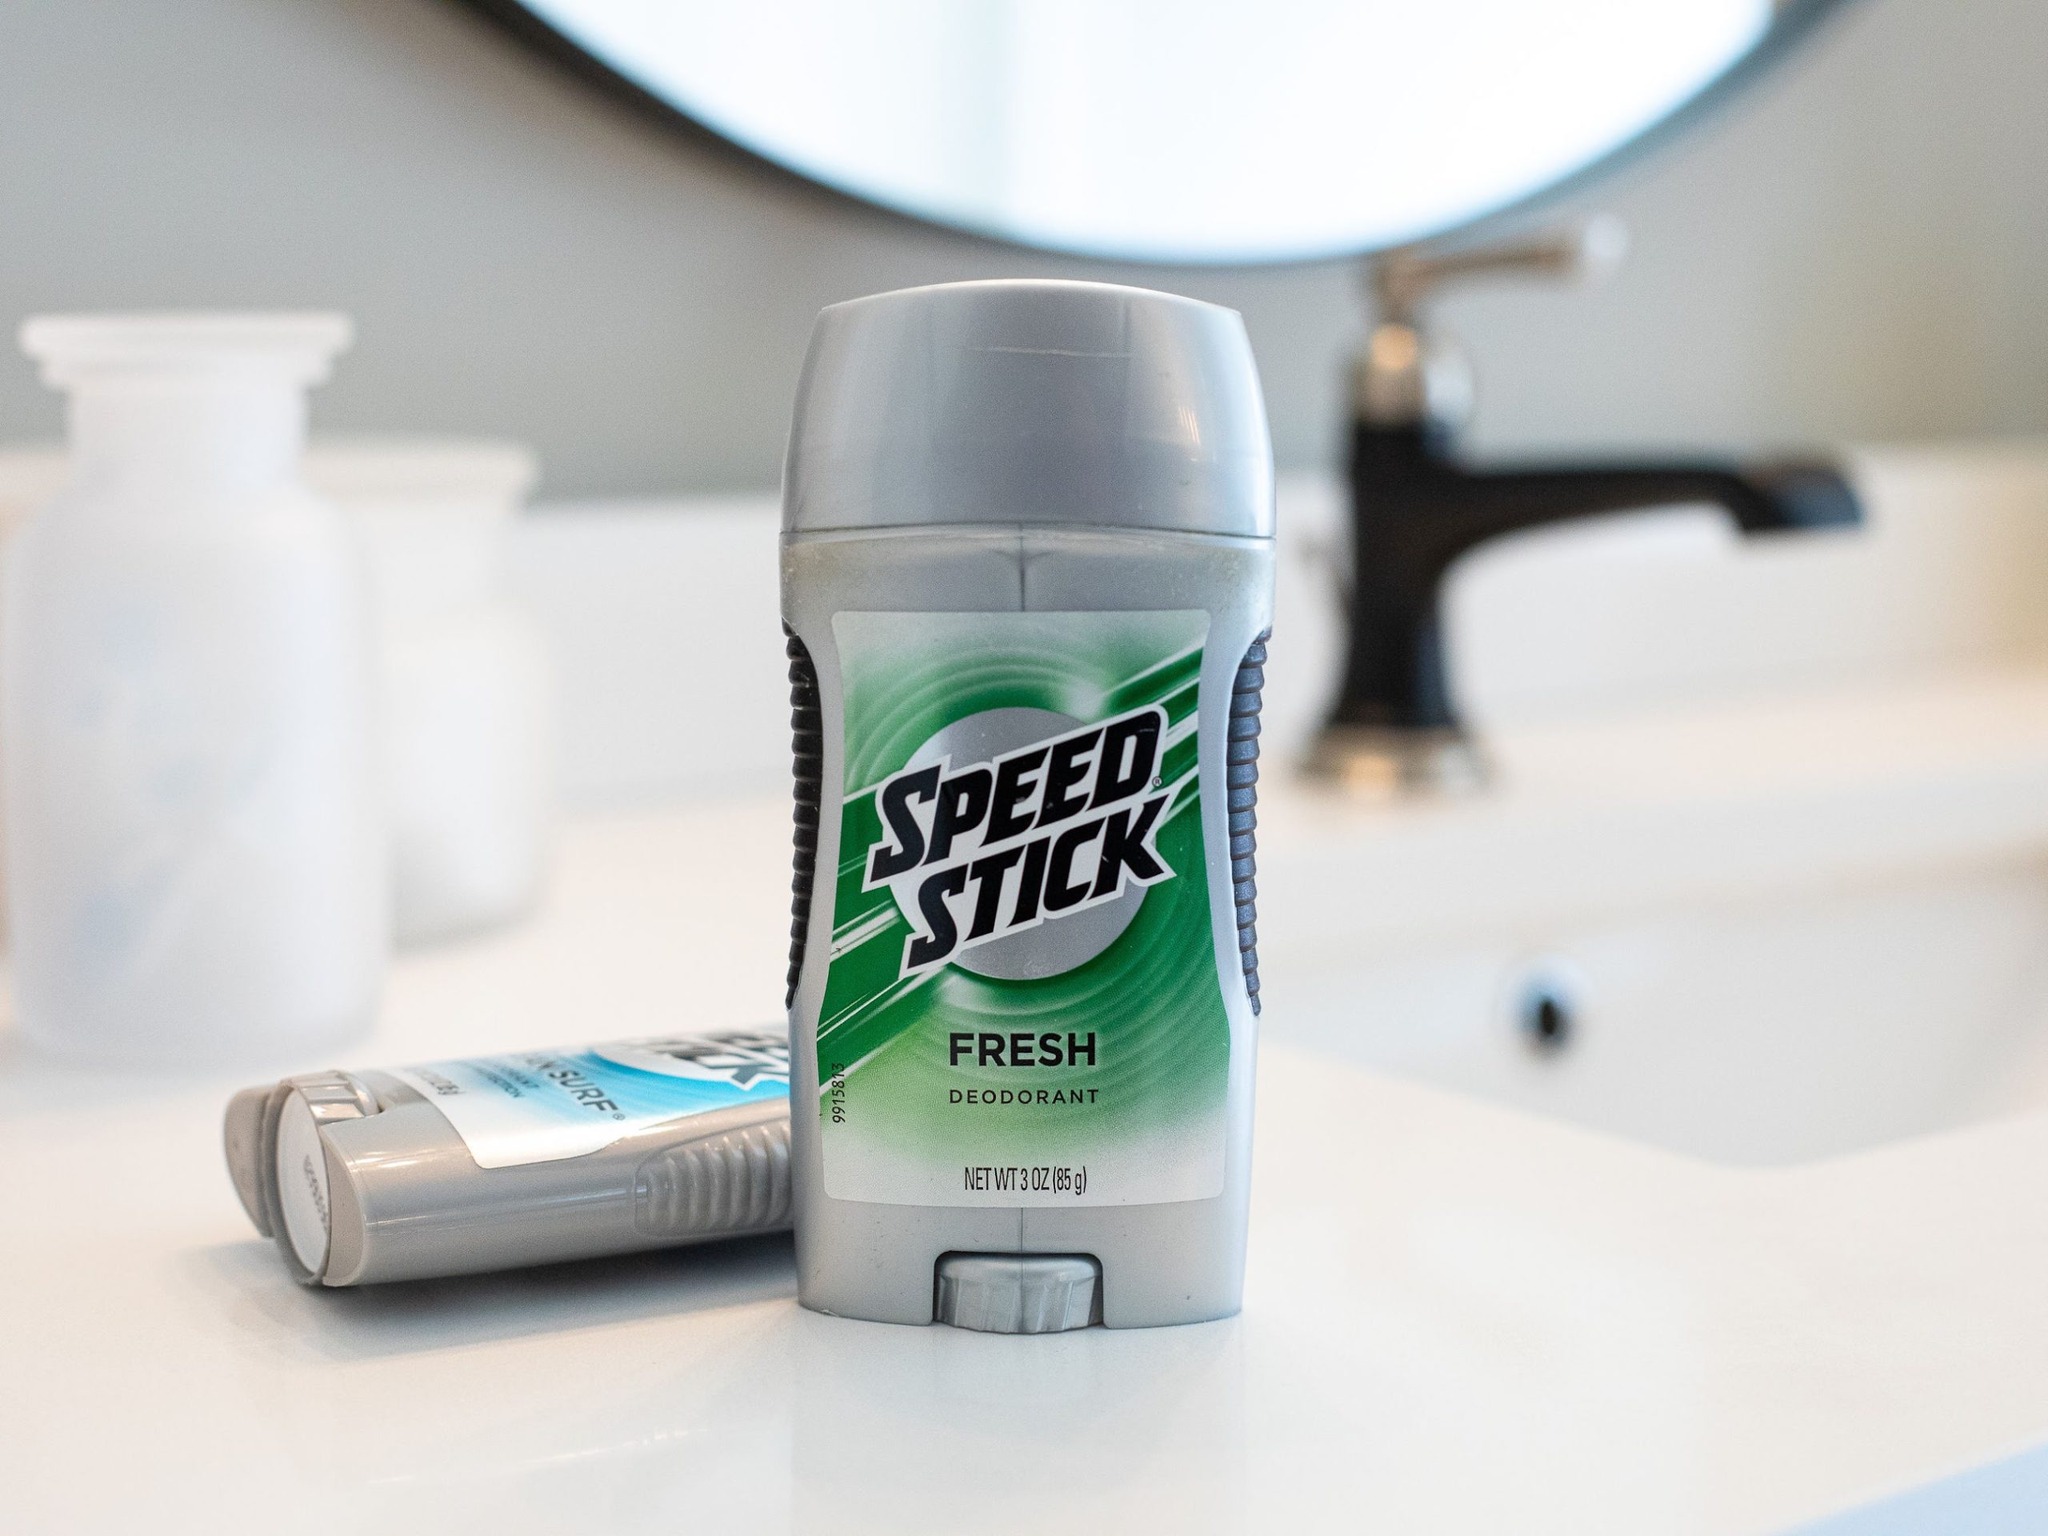 Speed Stick Deodorant As Low As 69¢ At Kroger